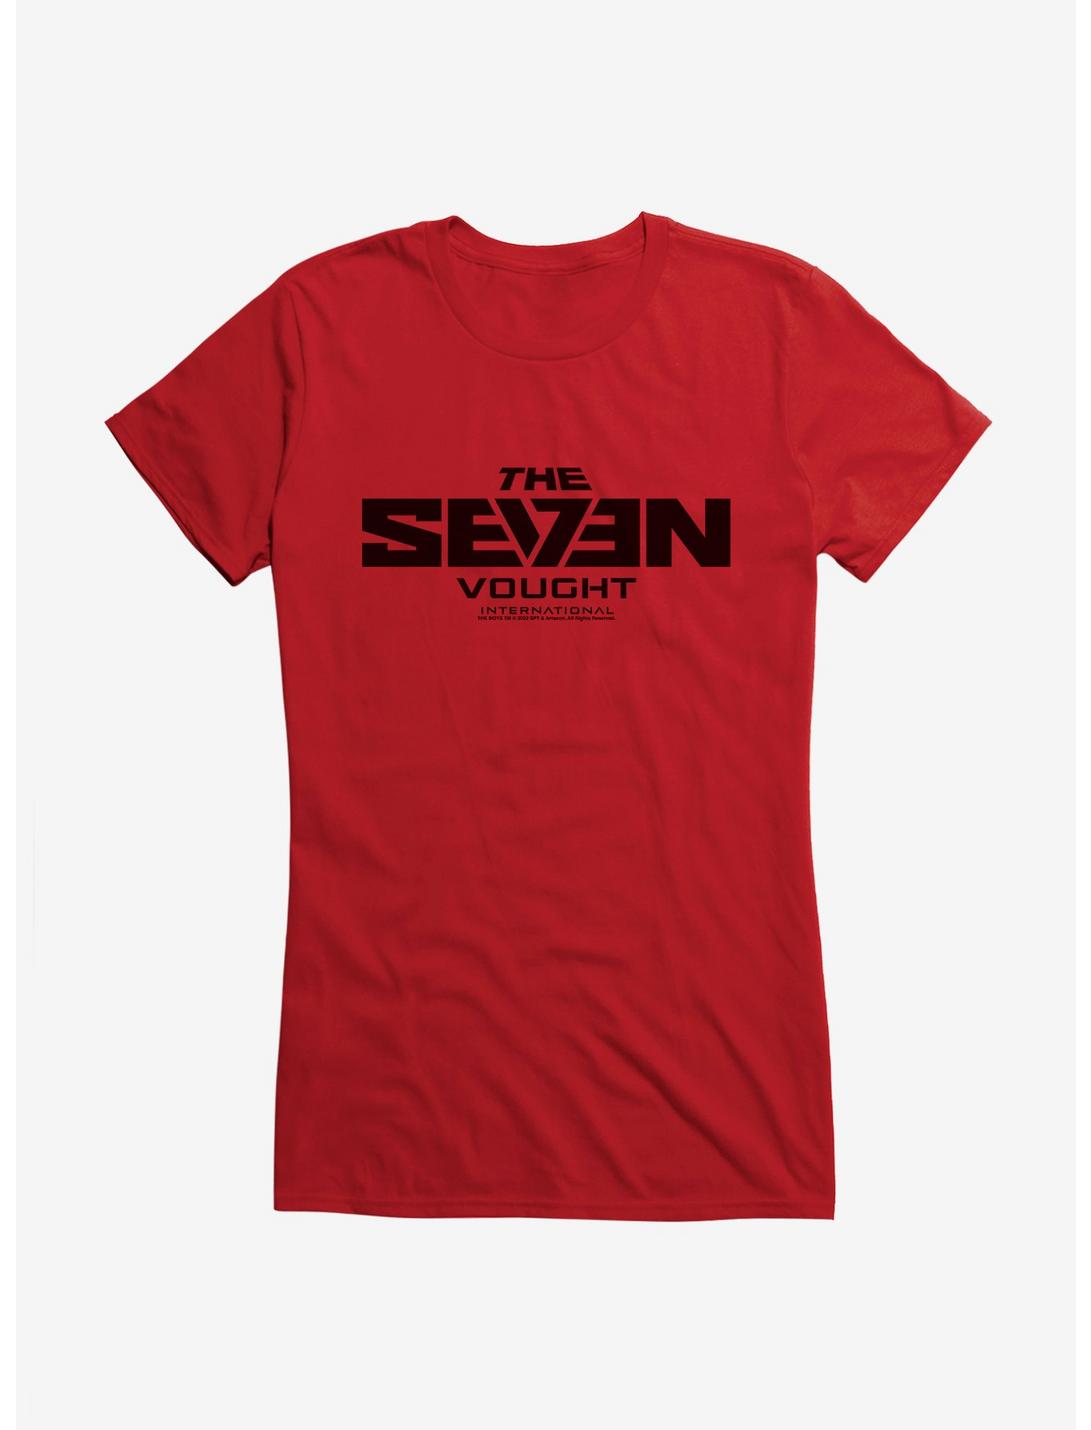 The Boys The Seven By Vought Intl. Girls T-Shirt, , hi-res